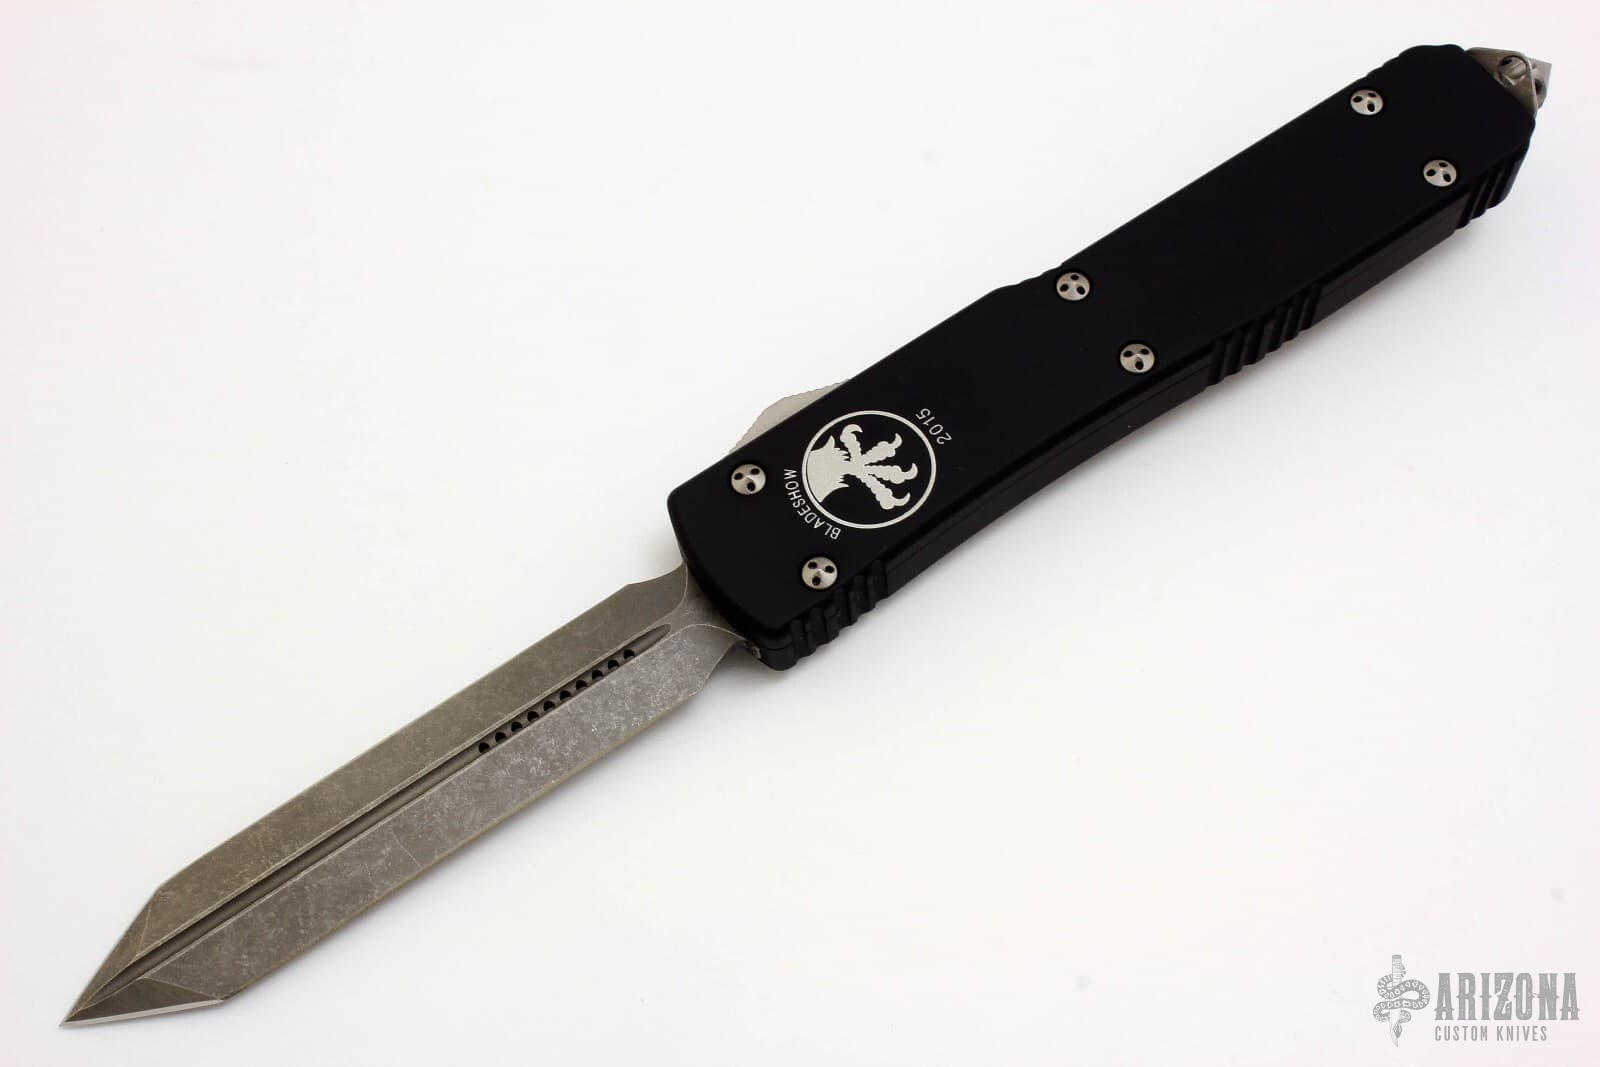 https://cdn.arizonacustomknives.com/images/products/orig/ulultratech_t_d_e___blade_show_special_2015_170930_1.jpg